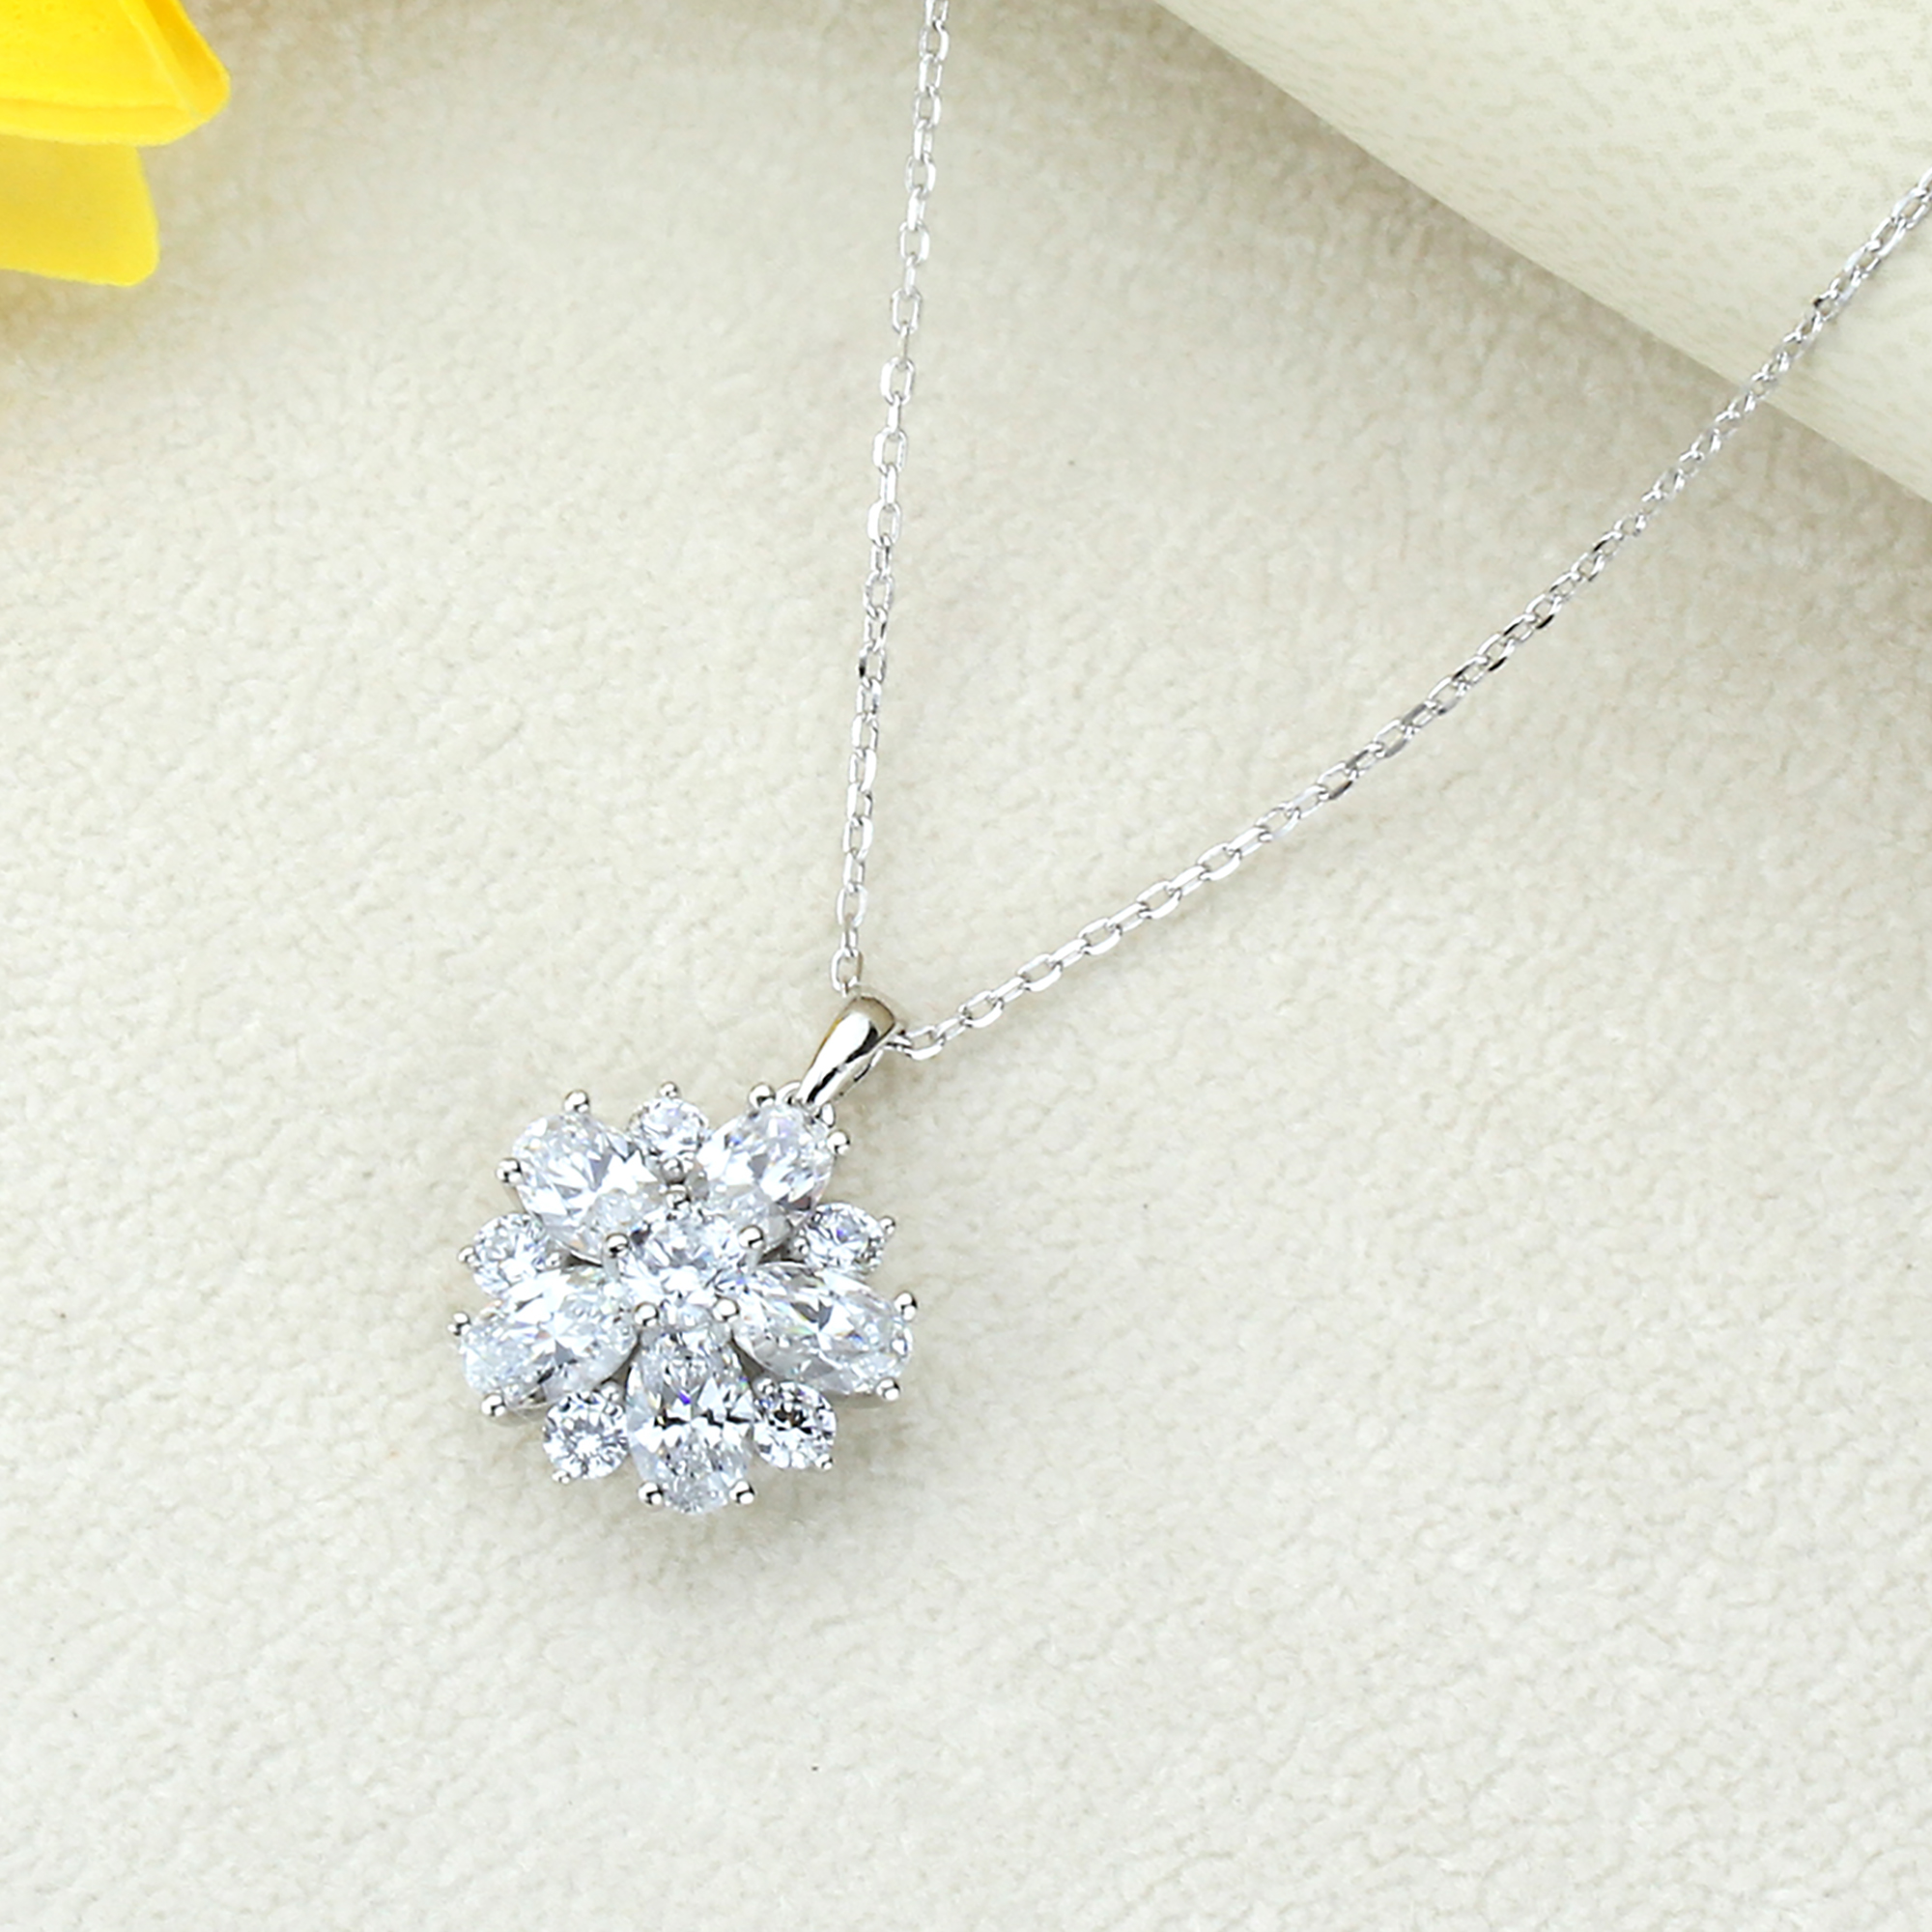 16"+2" Platinum Plated Sterling Silver Oval Cut Cubic CZ Flower Pendant Necklace